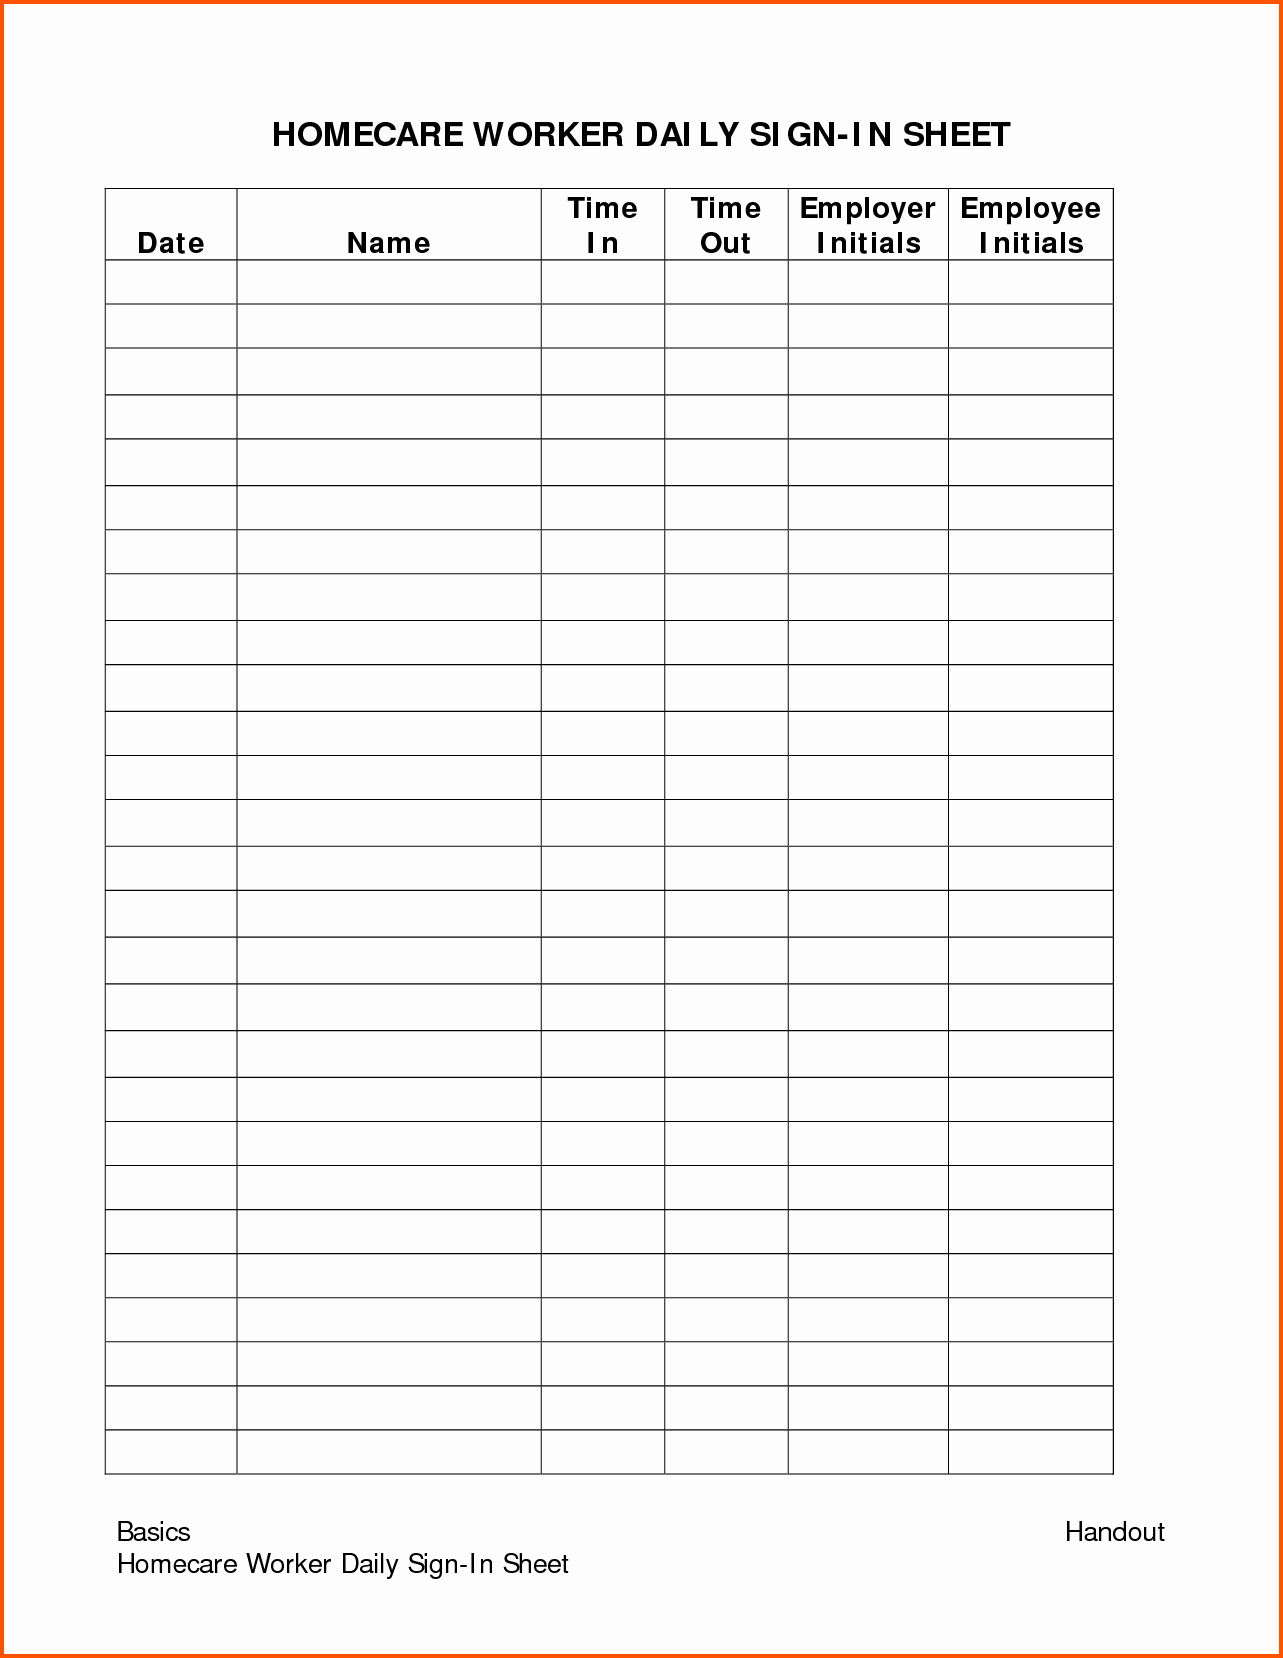 Signing In and Out Template New tool Sign Out Sheet Etame Mibawa